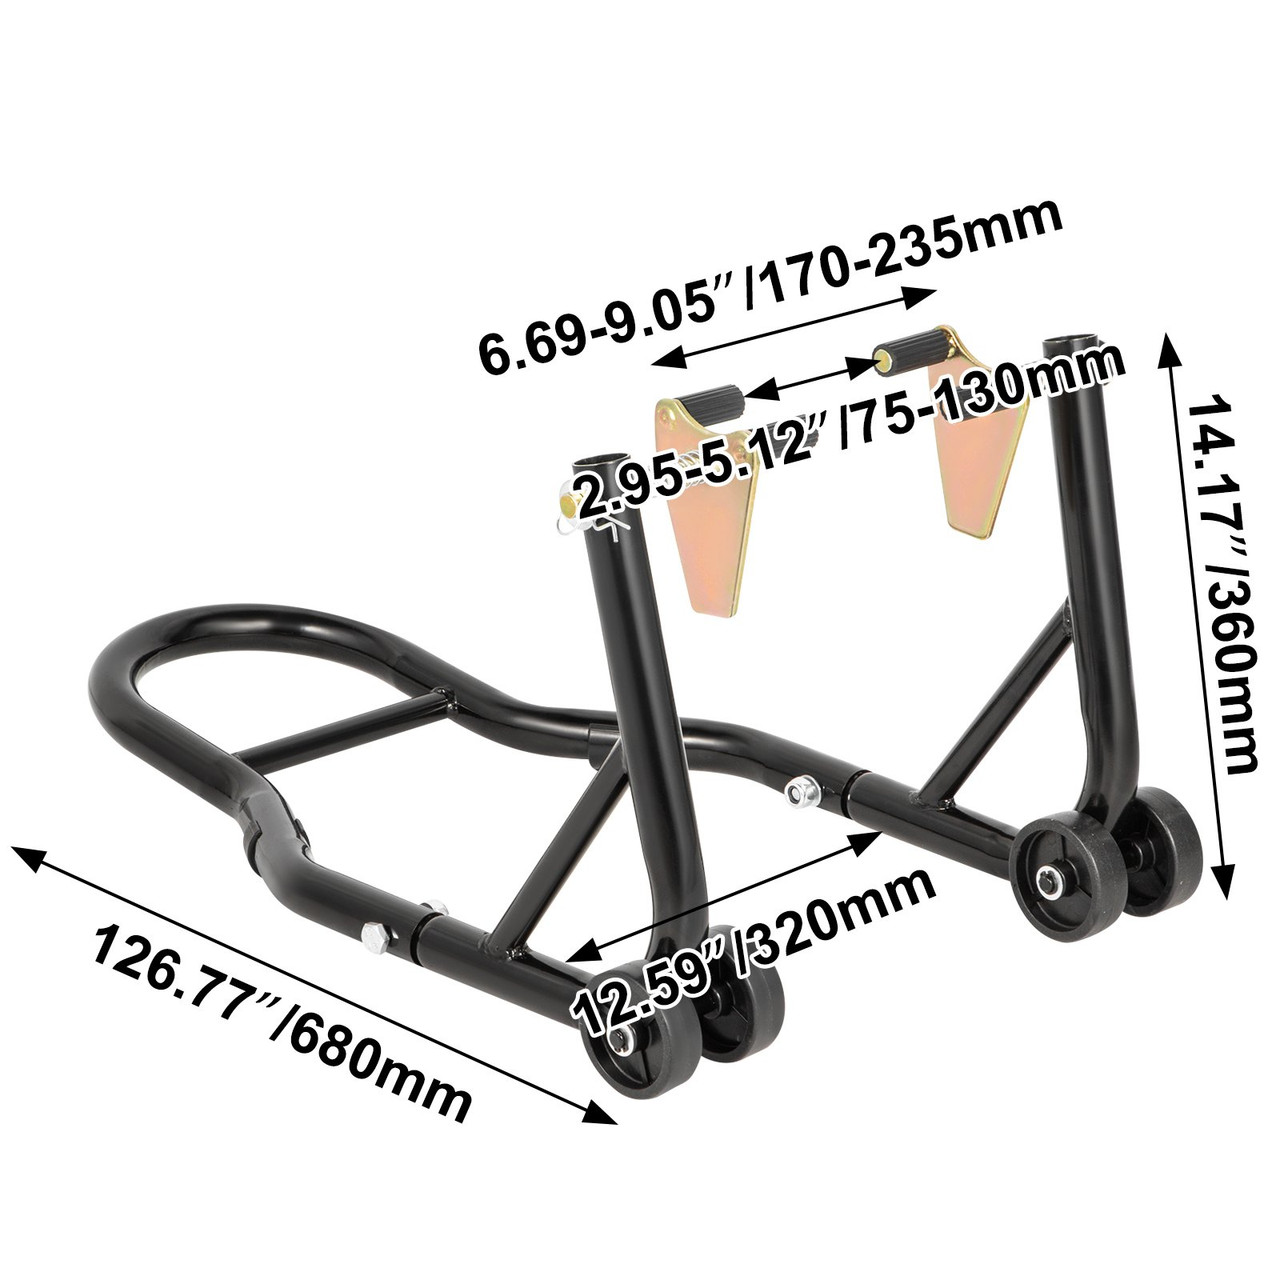 Motorcycle Stand Paddock Stand Front Fork Lift Sport, 3 in Cast Iron Wheel